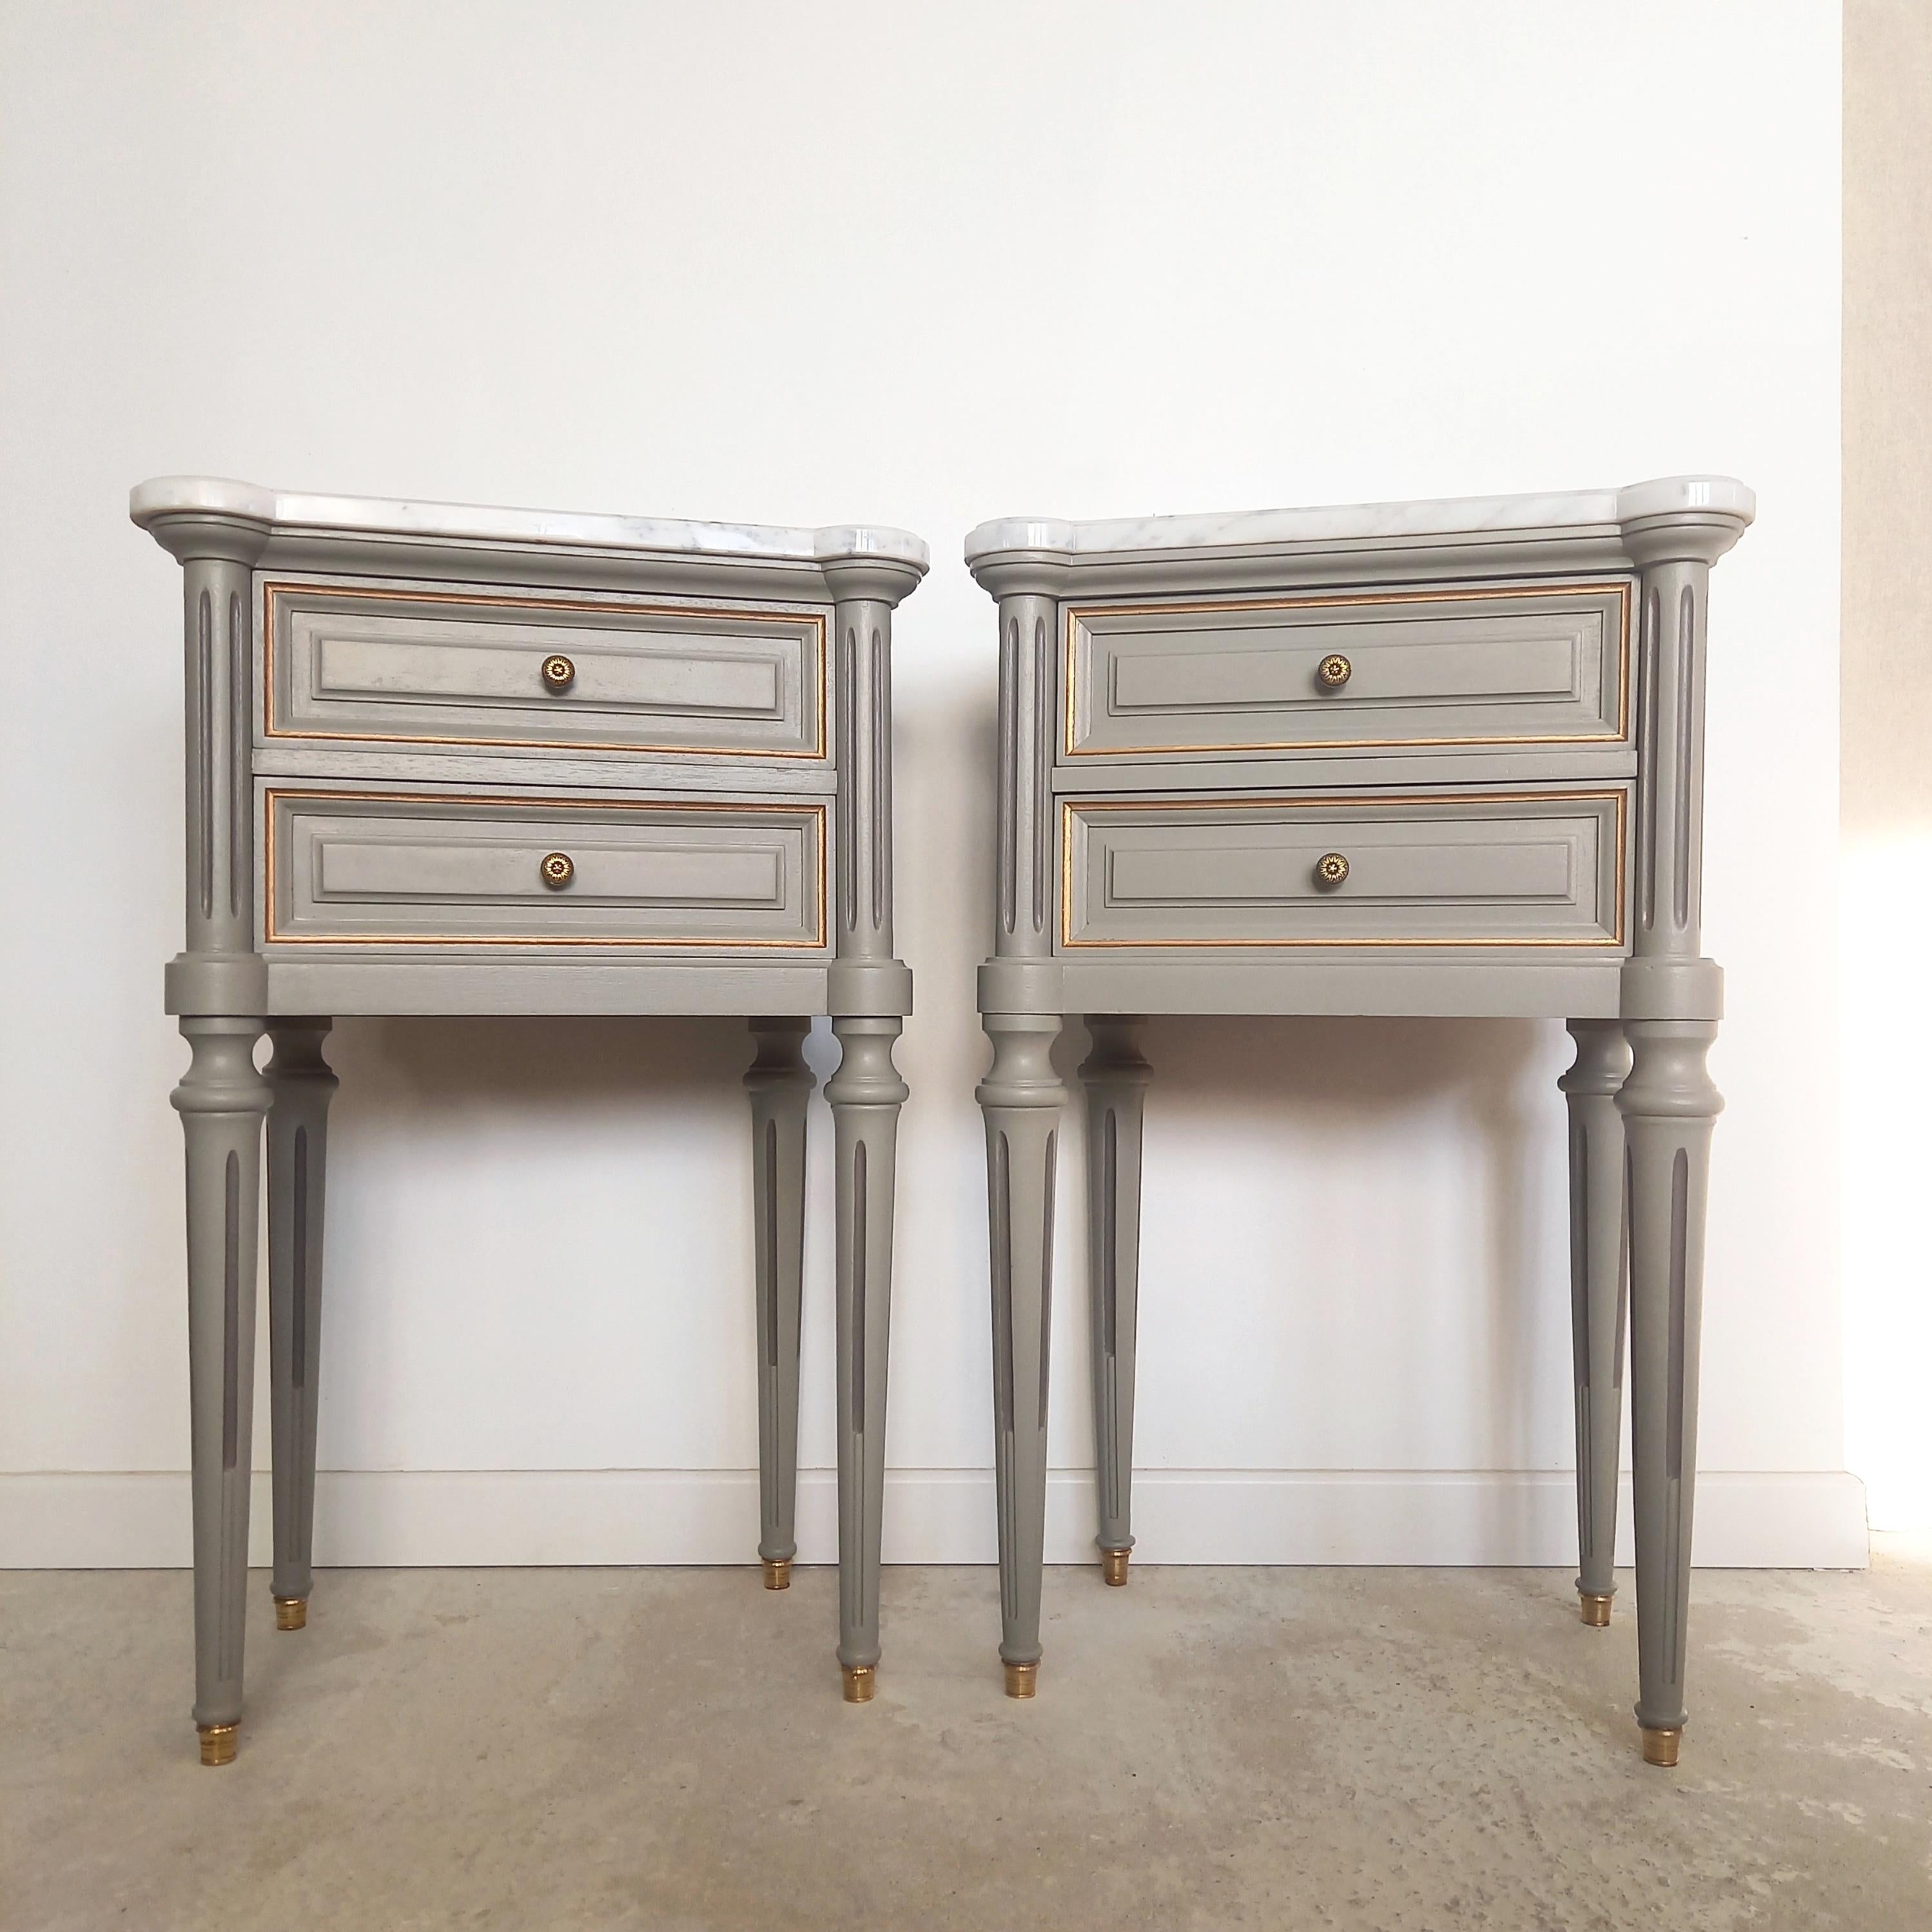 Antique French Louis XVI style pair of nightstands or side tables topped with a Carrara marble, legs finished with golden bronze clogs, with two dovetailed drawers.